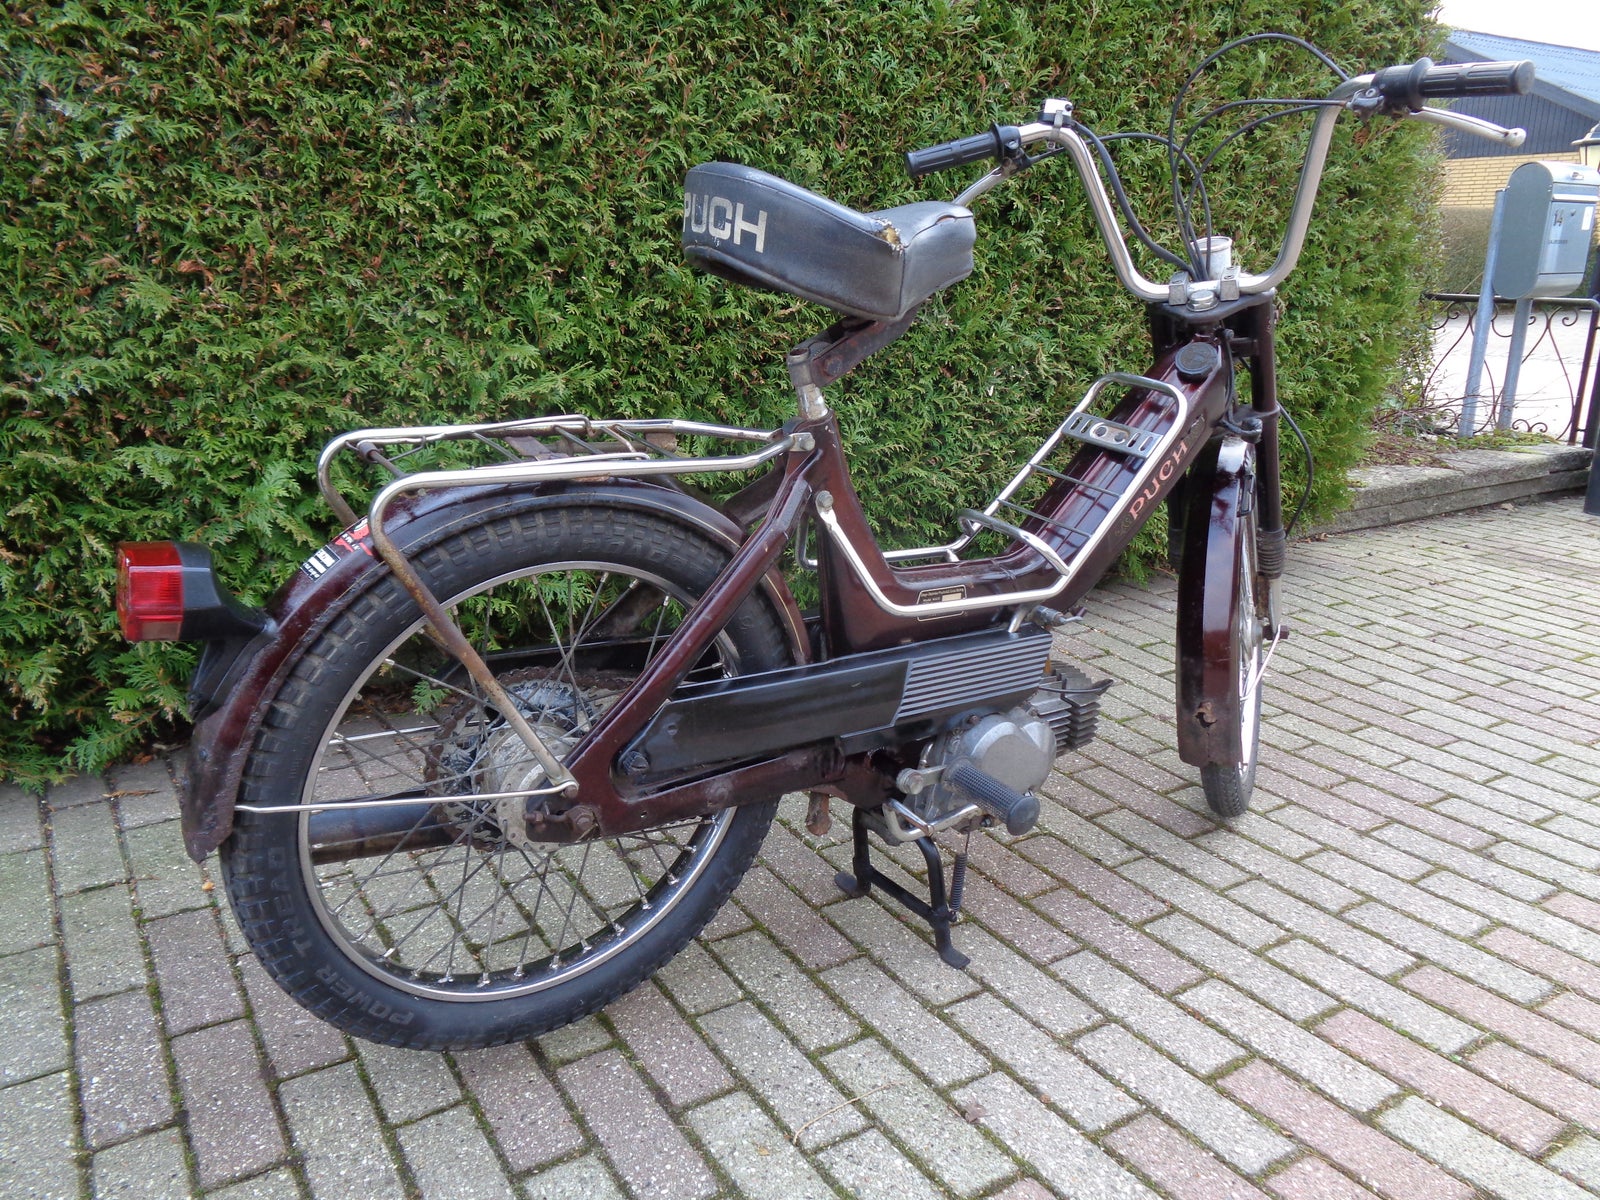 Puch PUCH MAXI K, 1974, 7621 km